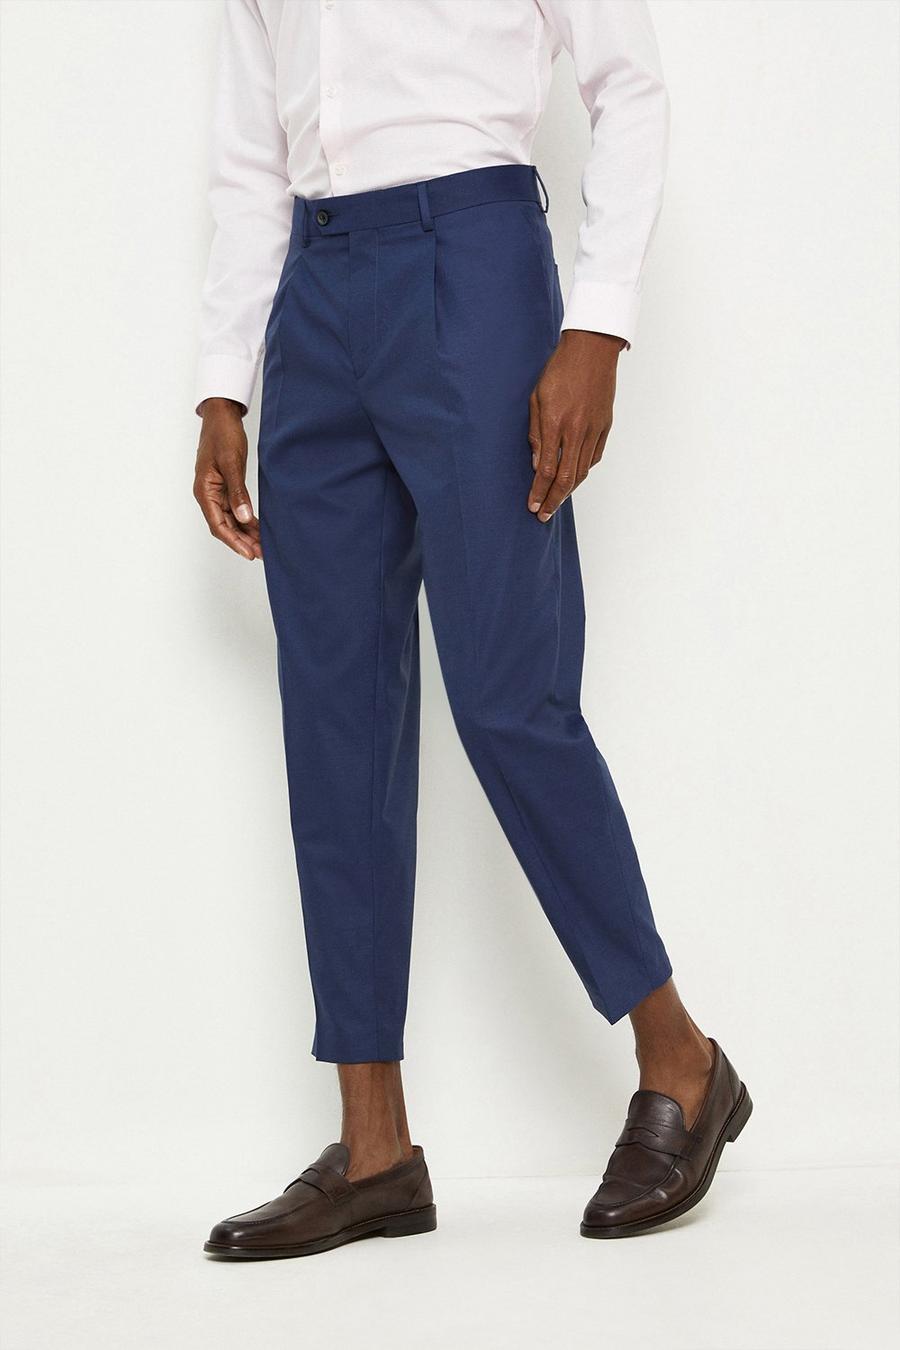 1904 Slim Fit Blue Double Breasted Two-Piece Suit